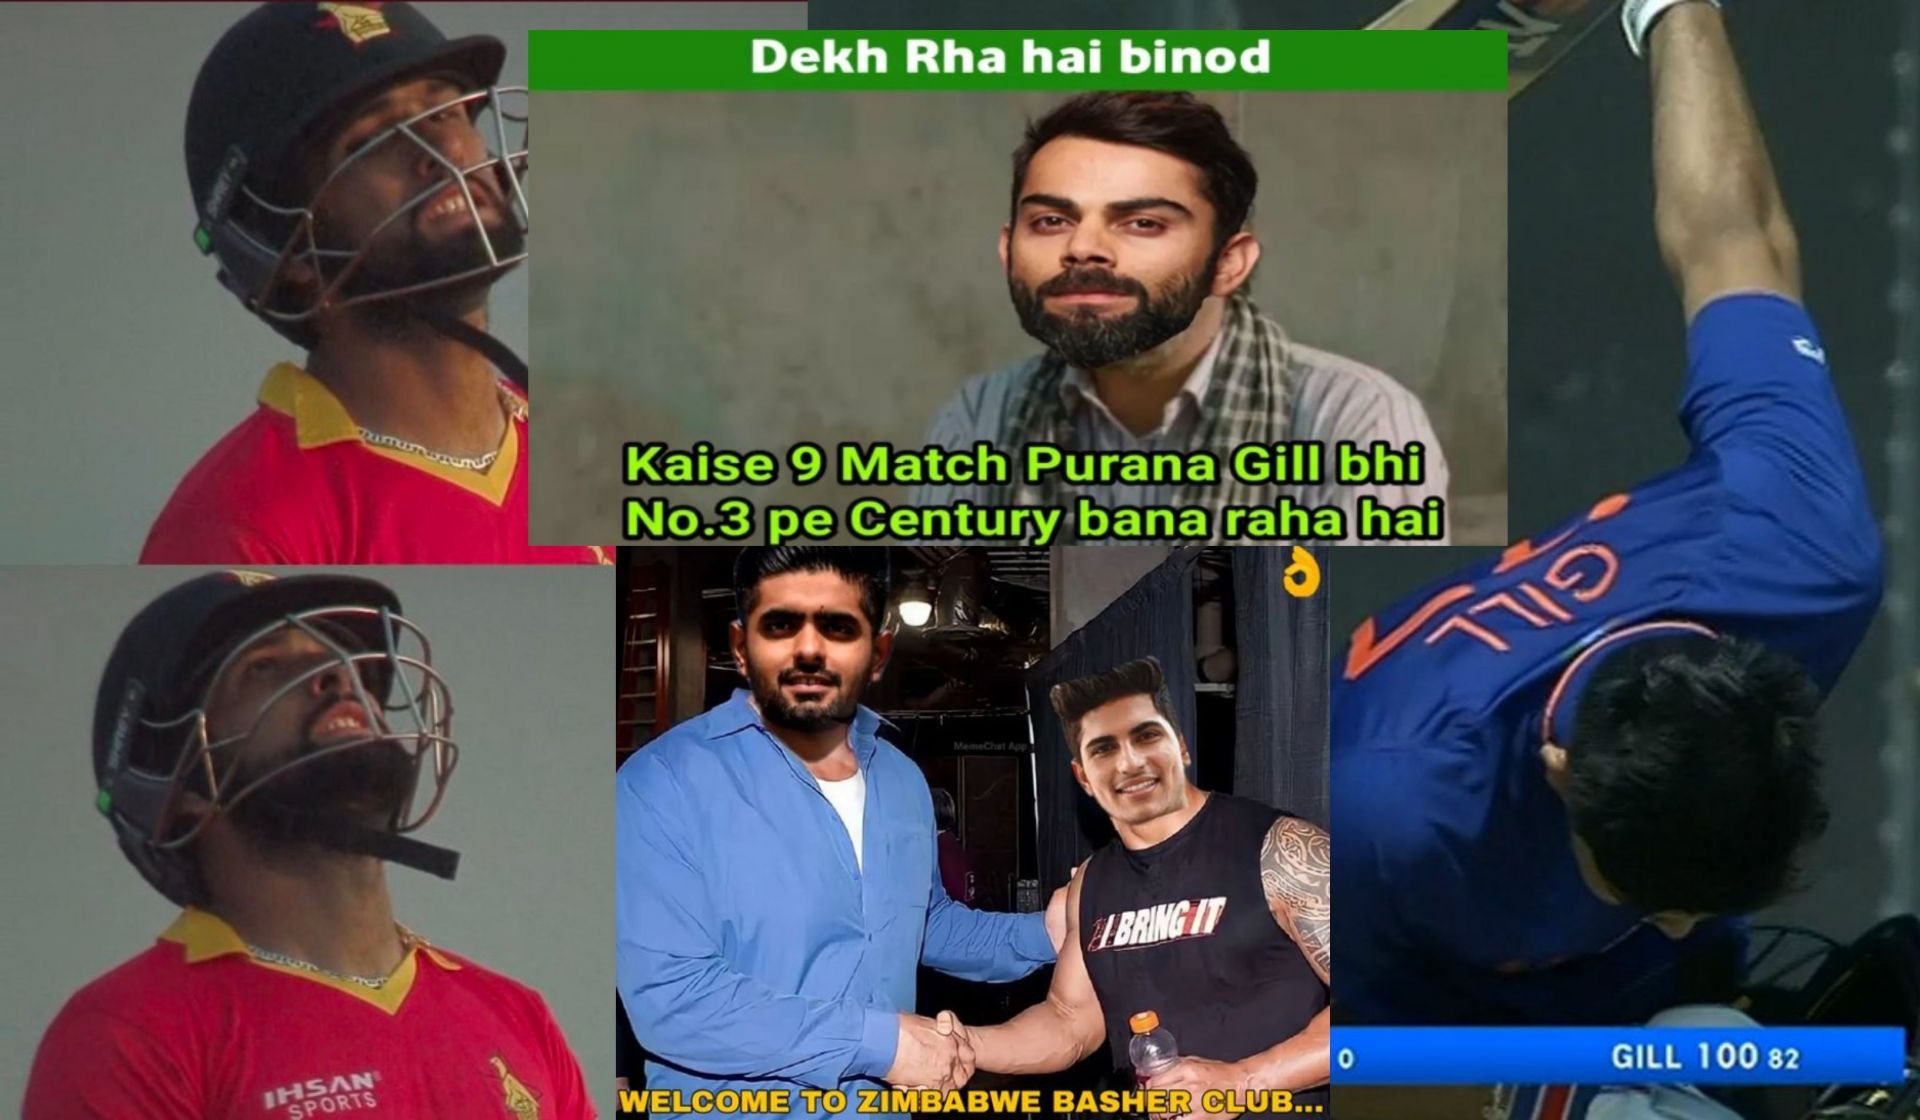 Fans took to social media to share memes after Zimbabwe lost the ODI series against India